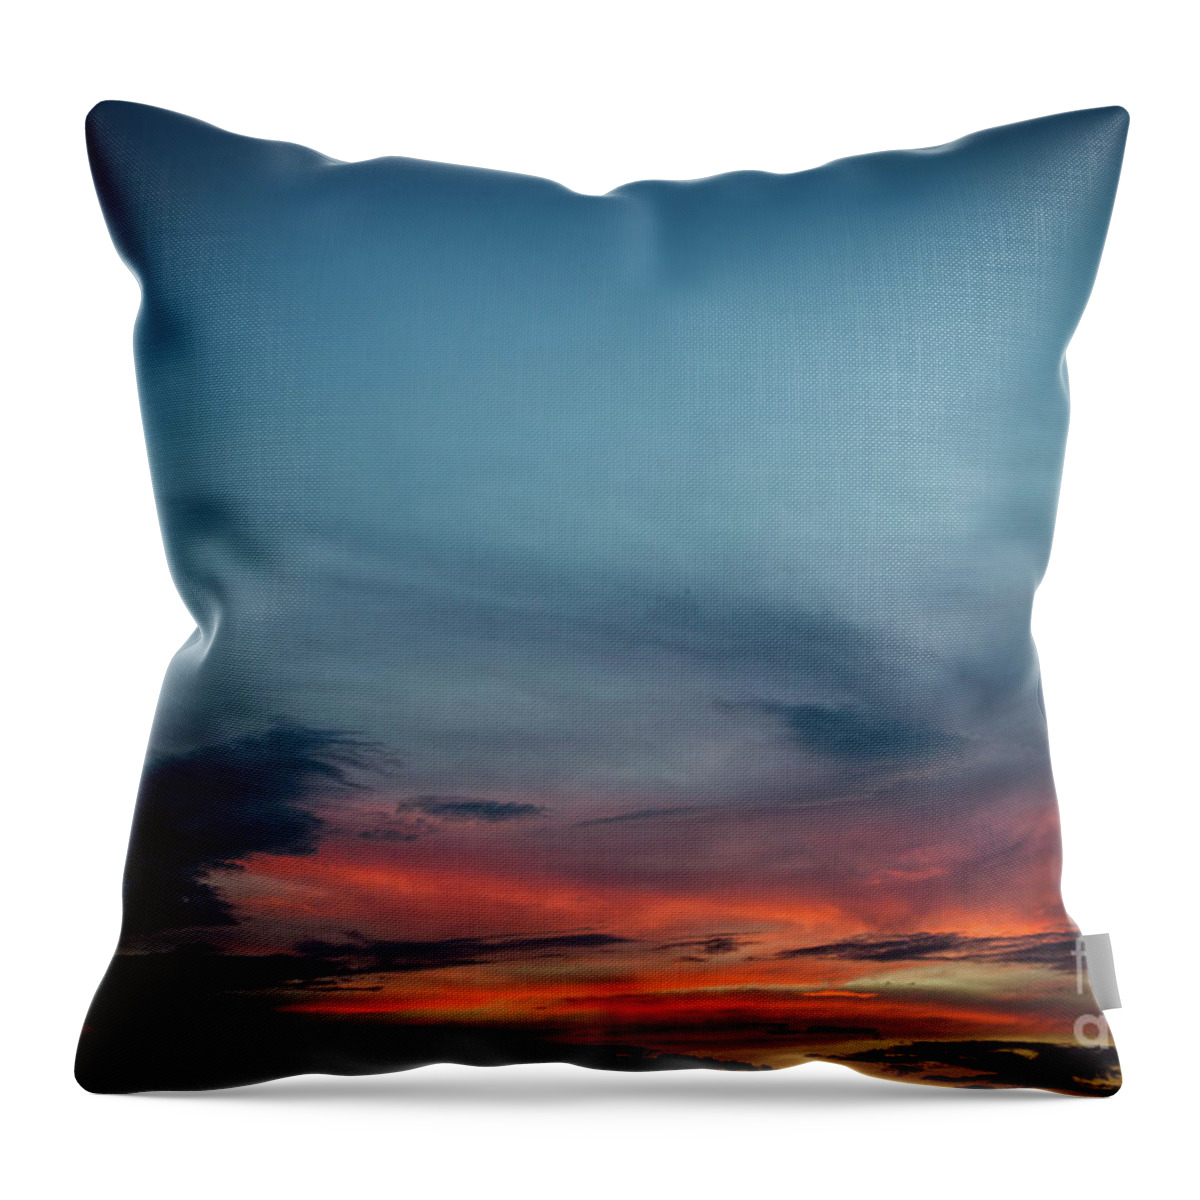 Sunset Throw Pillow featuring the photograph Painted Sunset by Kathy Strauss